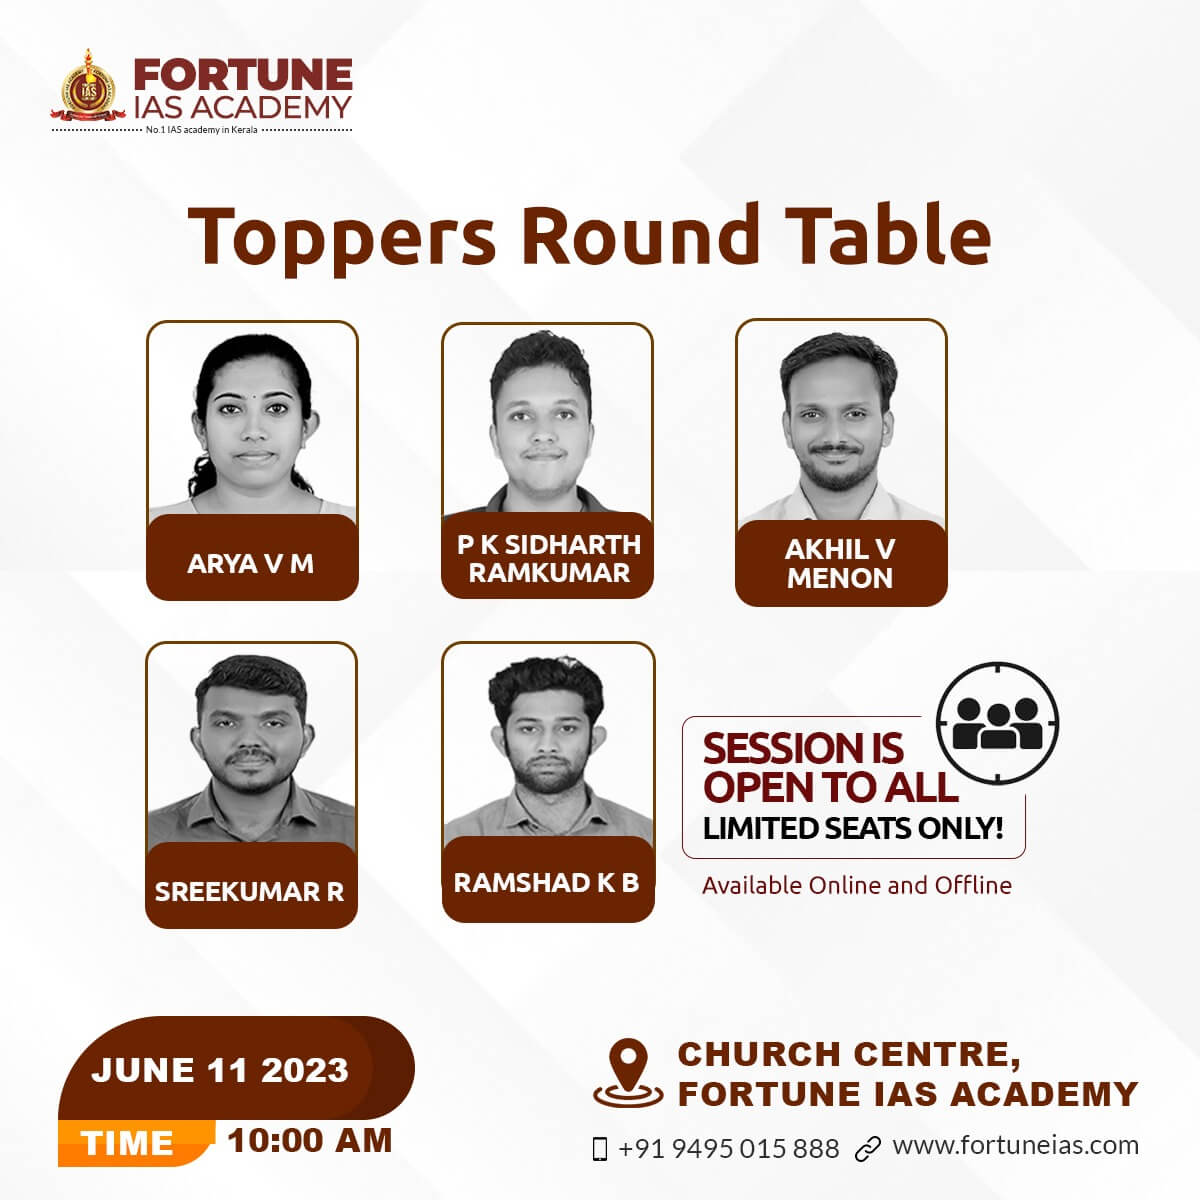 Toppers Round Table, June 11, 2023